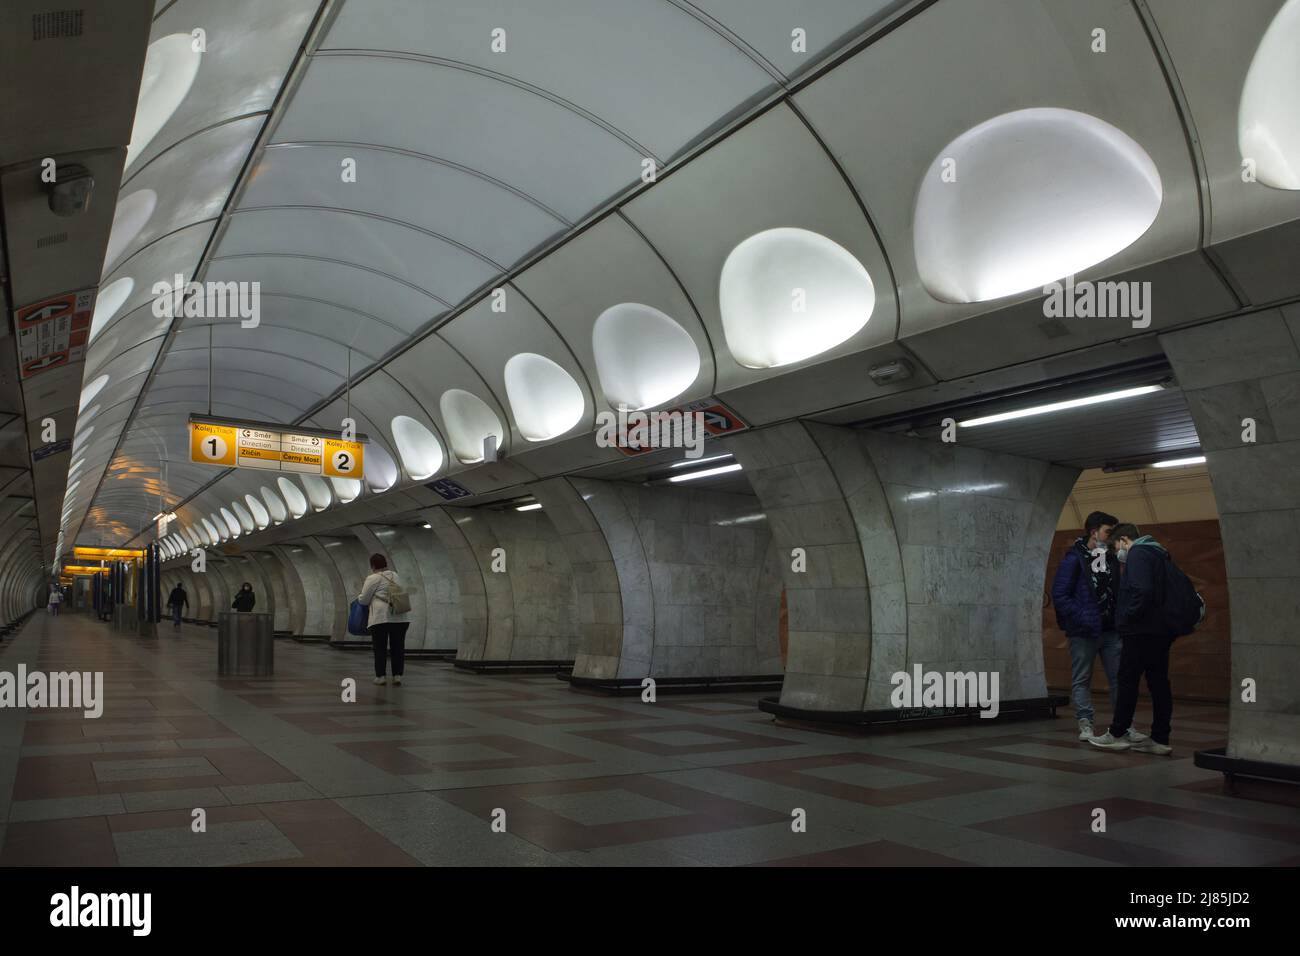 Interior of Anděl Station of the Prague Metro in Prague, Czech Republic. The underground station previously known as Moskevská Station (Moscow Station) was designed by Soviet modernist architect Lev Popov and completed in 1985. Lamps in the shape of eggs are very typical for his projects of underground stations. Stock Photo